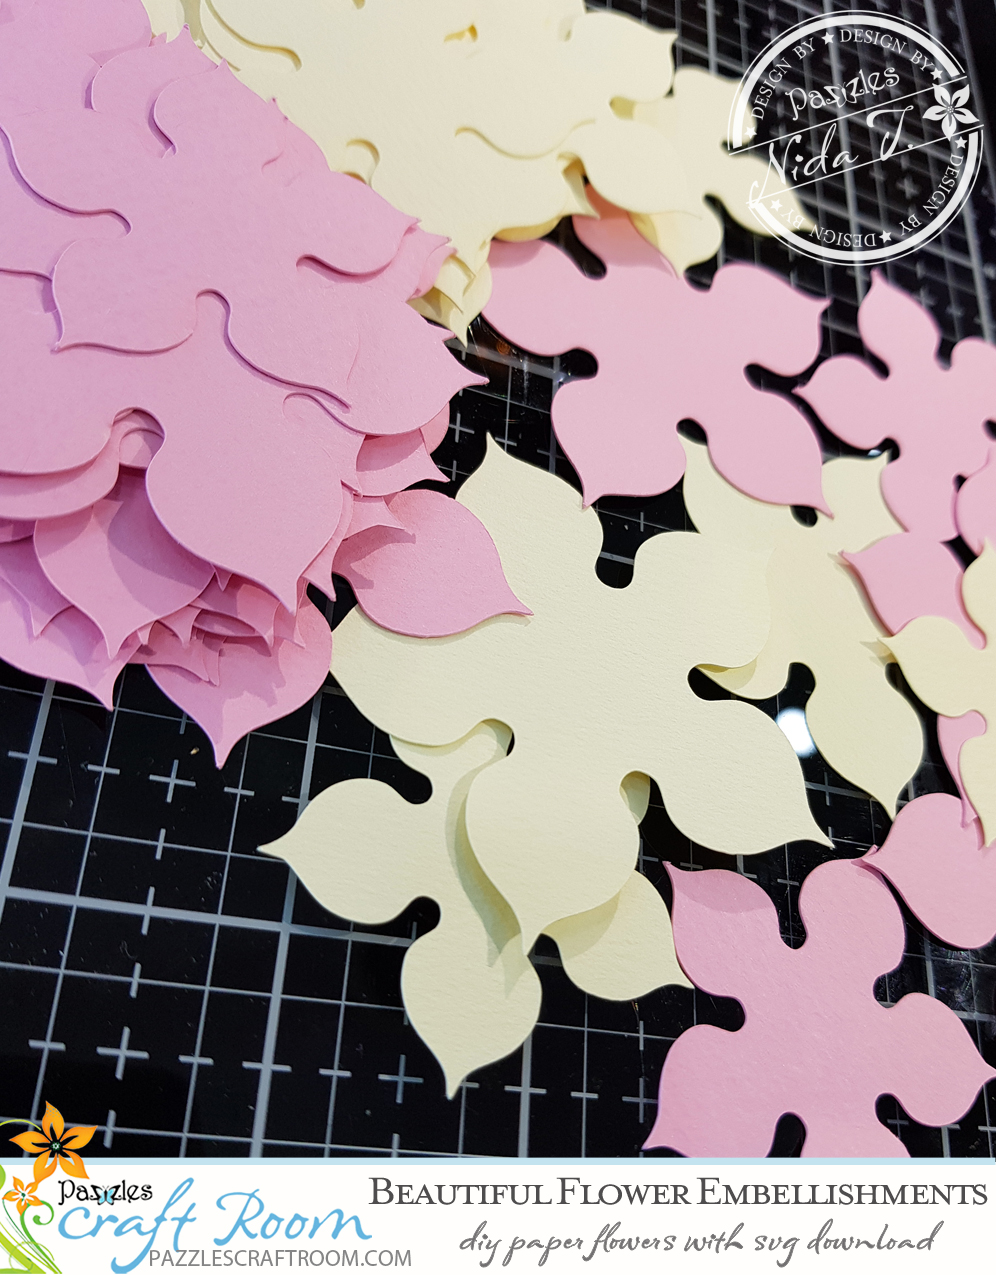 Pazzles DIY Paper Flower Embellishments with instant SVG download. Compatible with all major electronic cutters including Pazzles Inspiration, Cricut, and Silhouette Cameo. Design by Nida Tanweer.